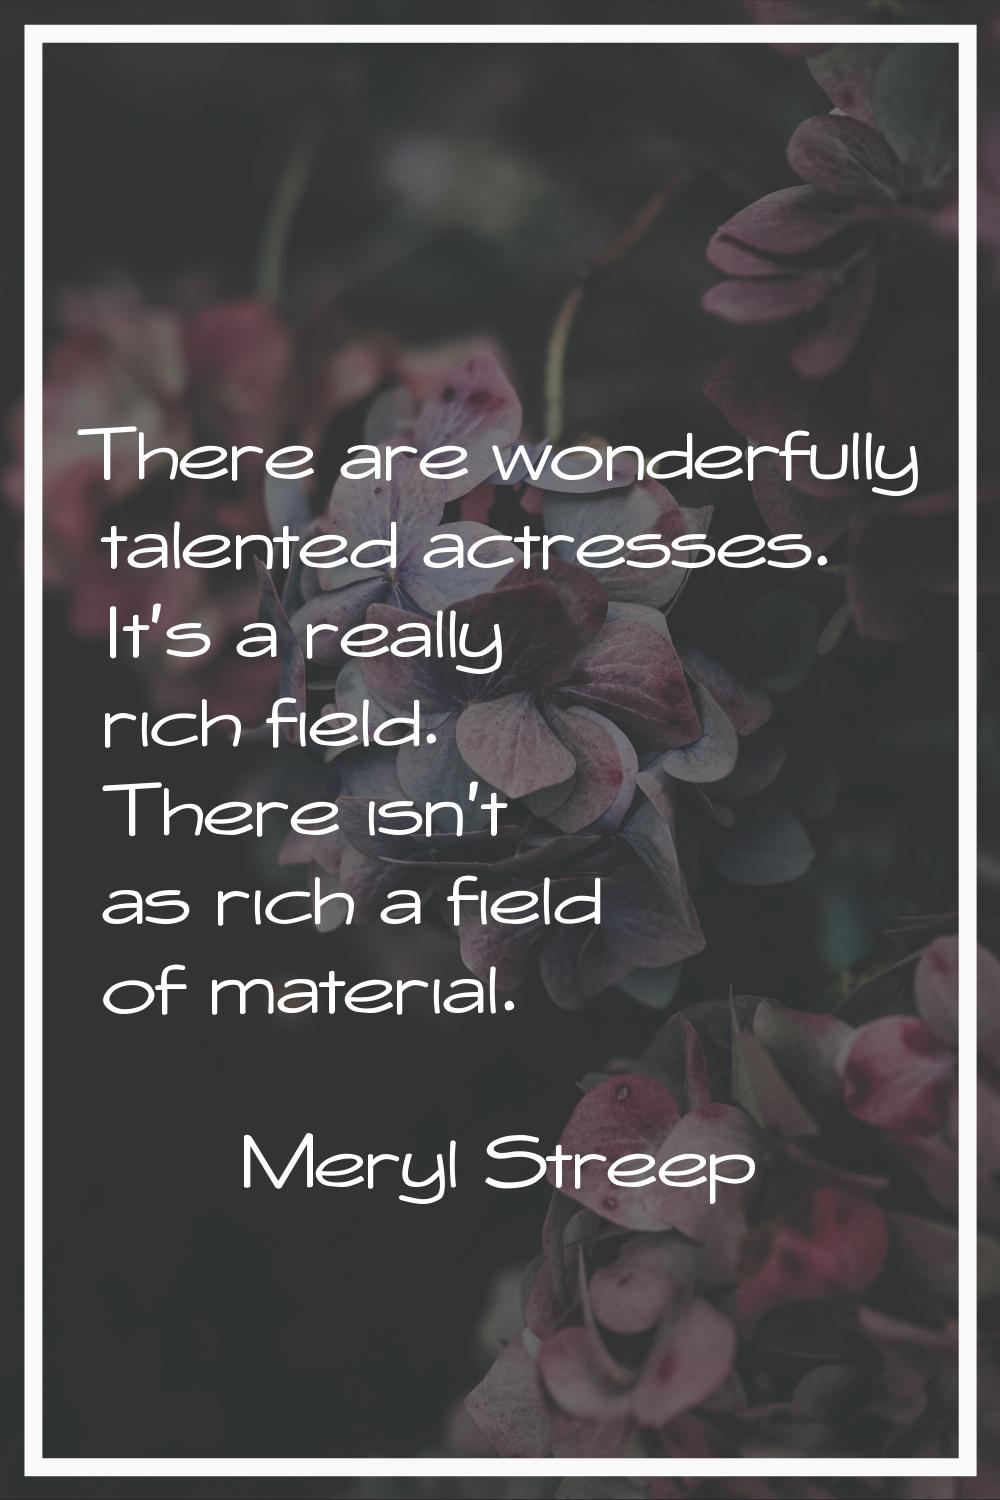 There are wonderfully talented actresses. It's a really rich field. There isn't as rich a field of 